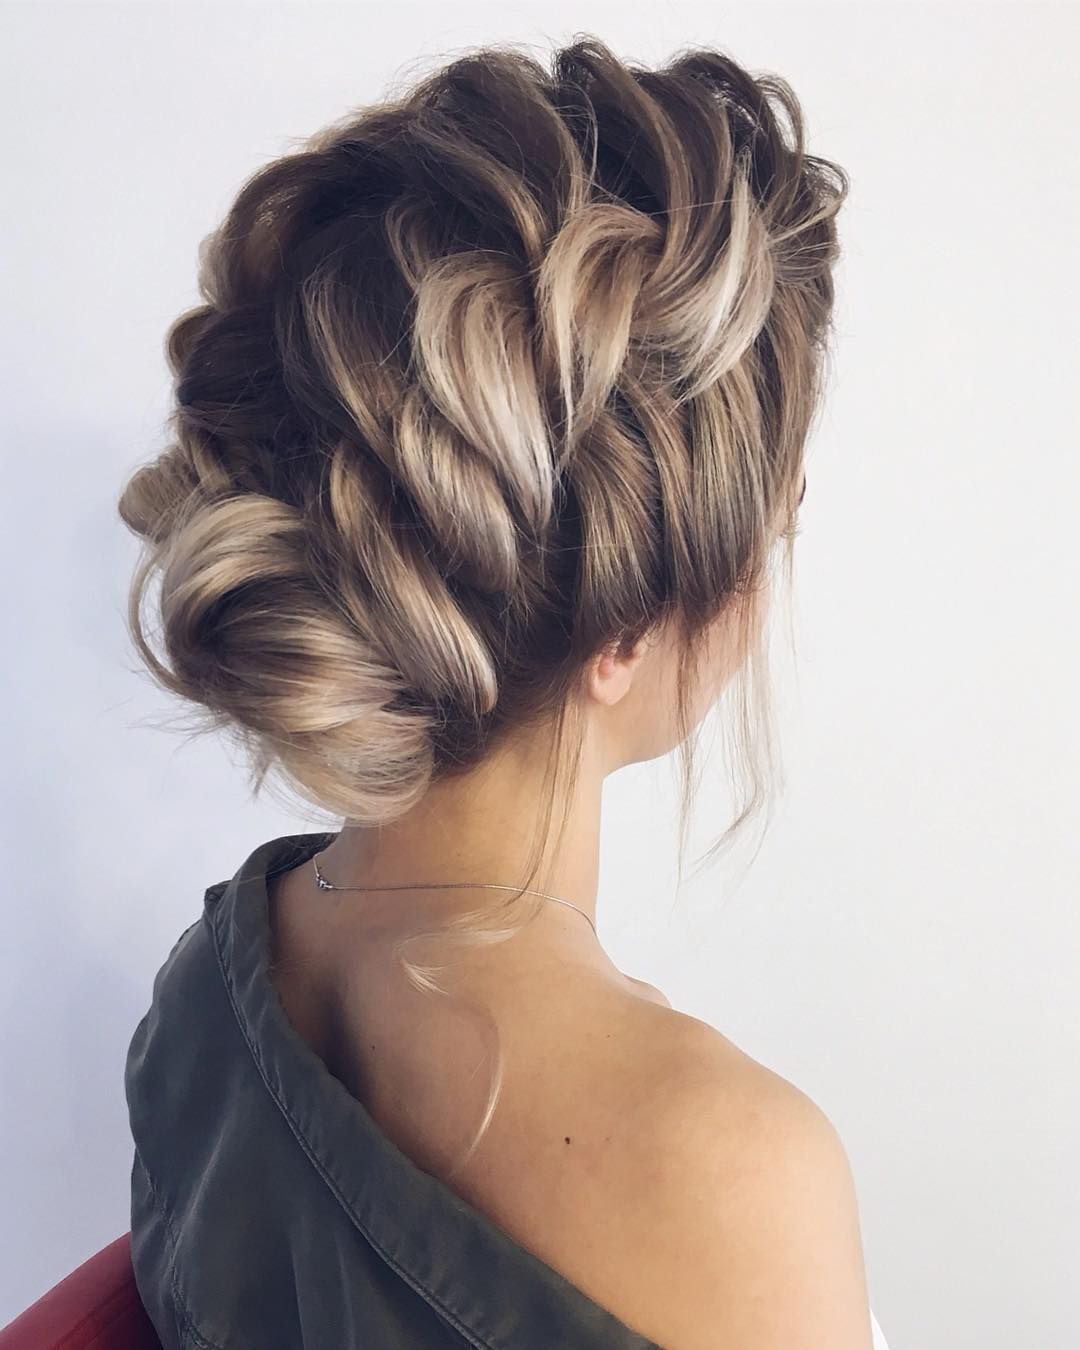 55 Amazing Updo Hairstyles With The Wow Factor -   18 hairstyles Casual french twists ideas